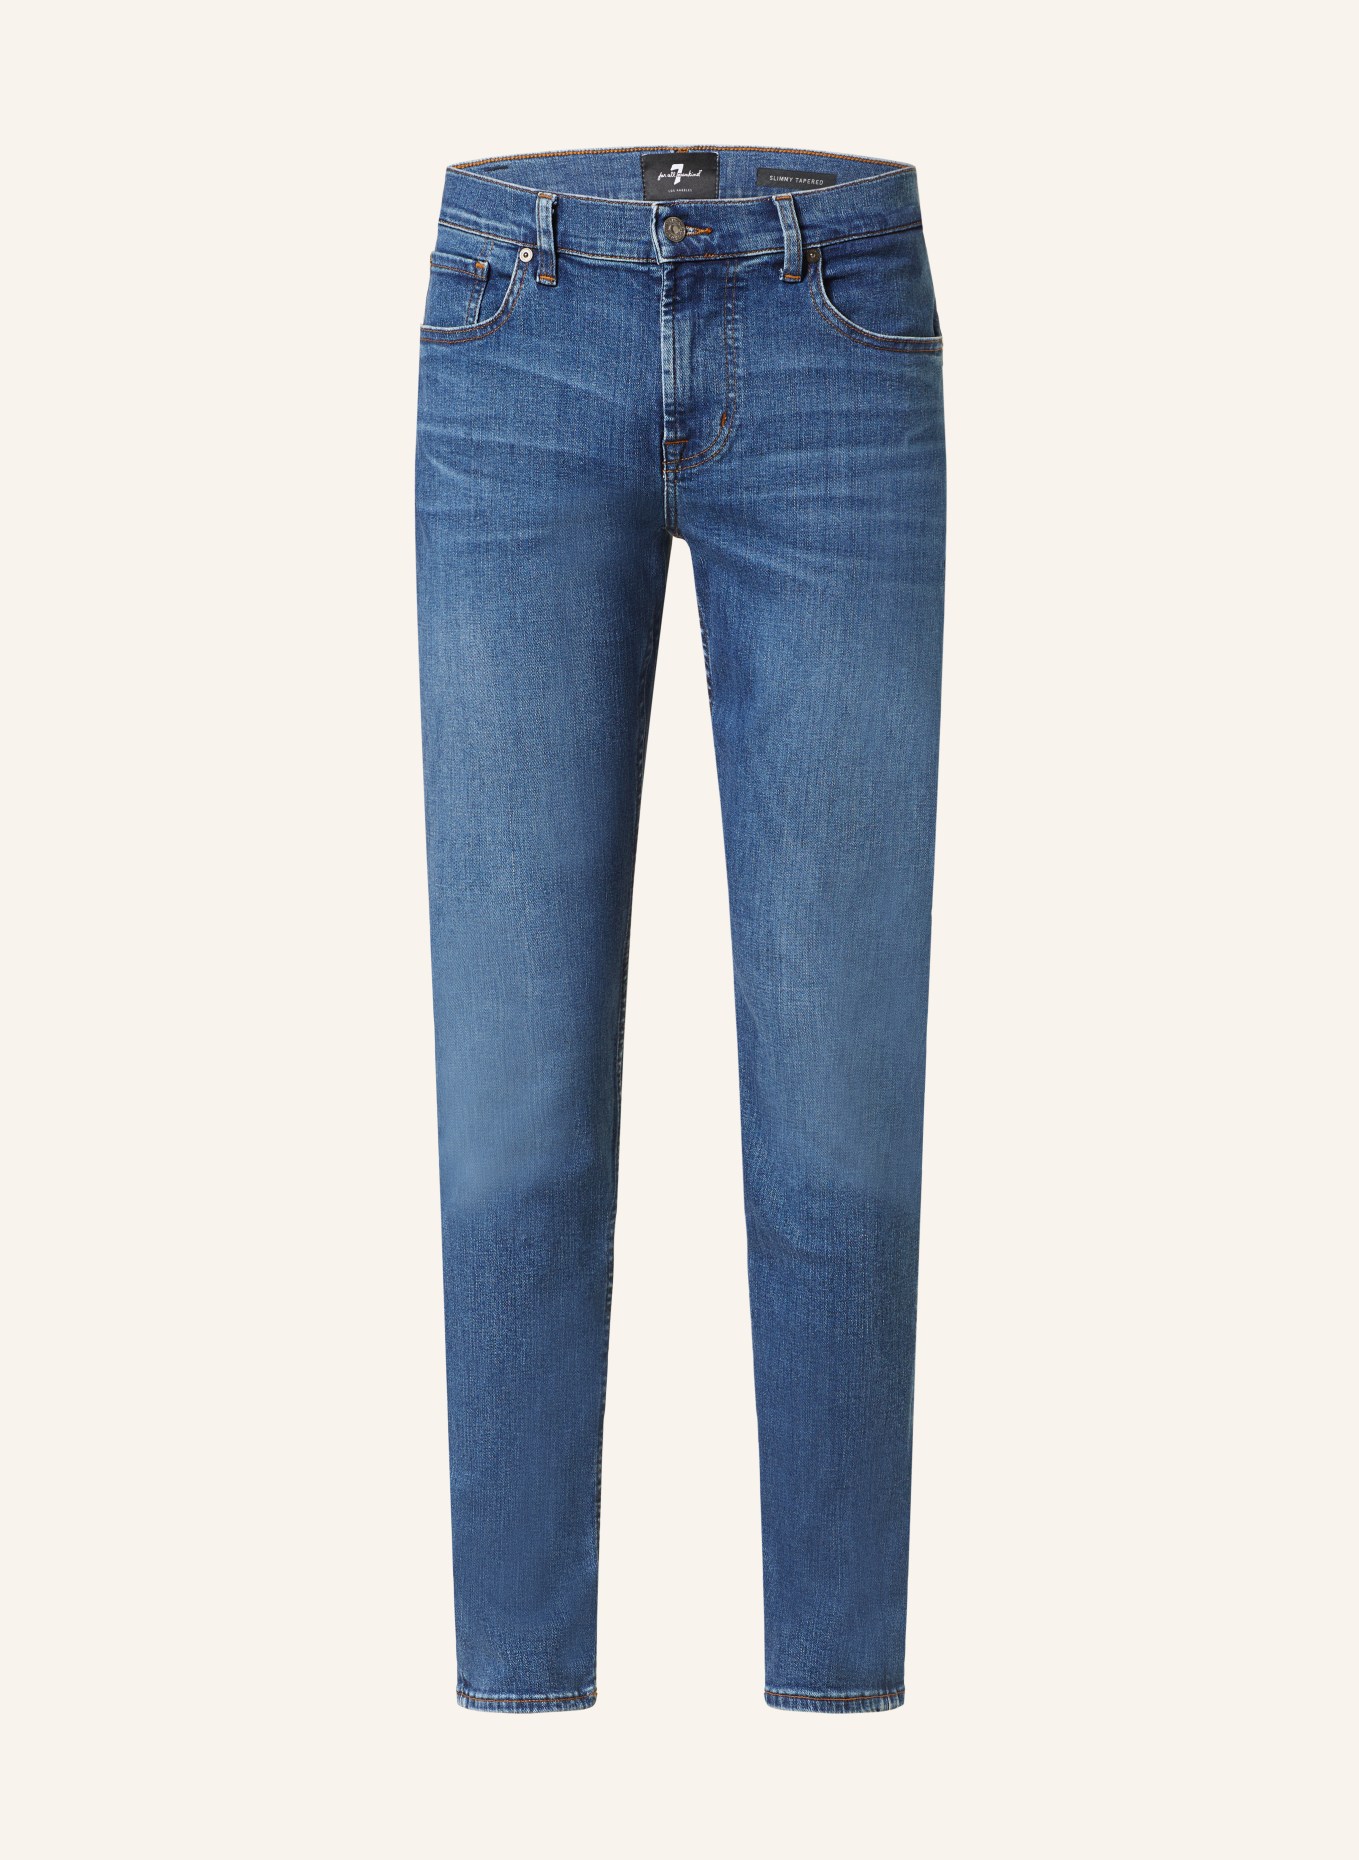 7 for all mankind Jeans SLIMMY Tapered Fit, Farbe: MID BLUE (Bild 1)